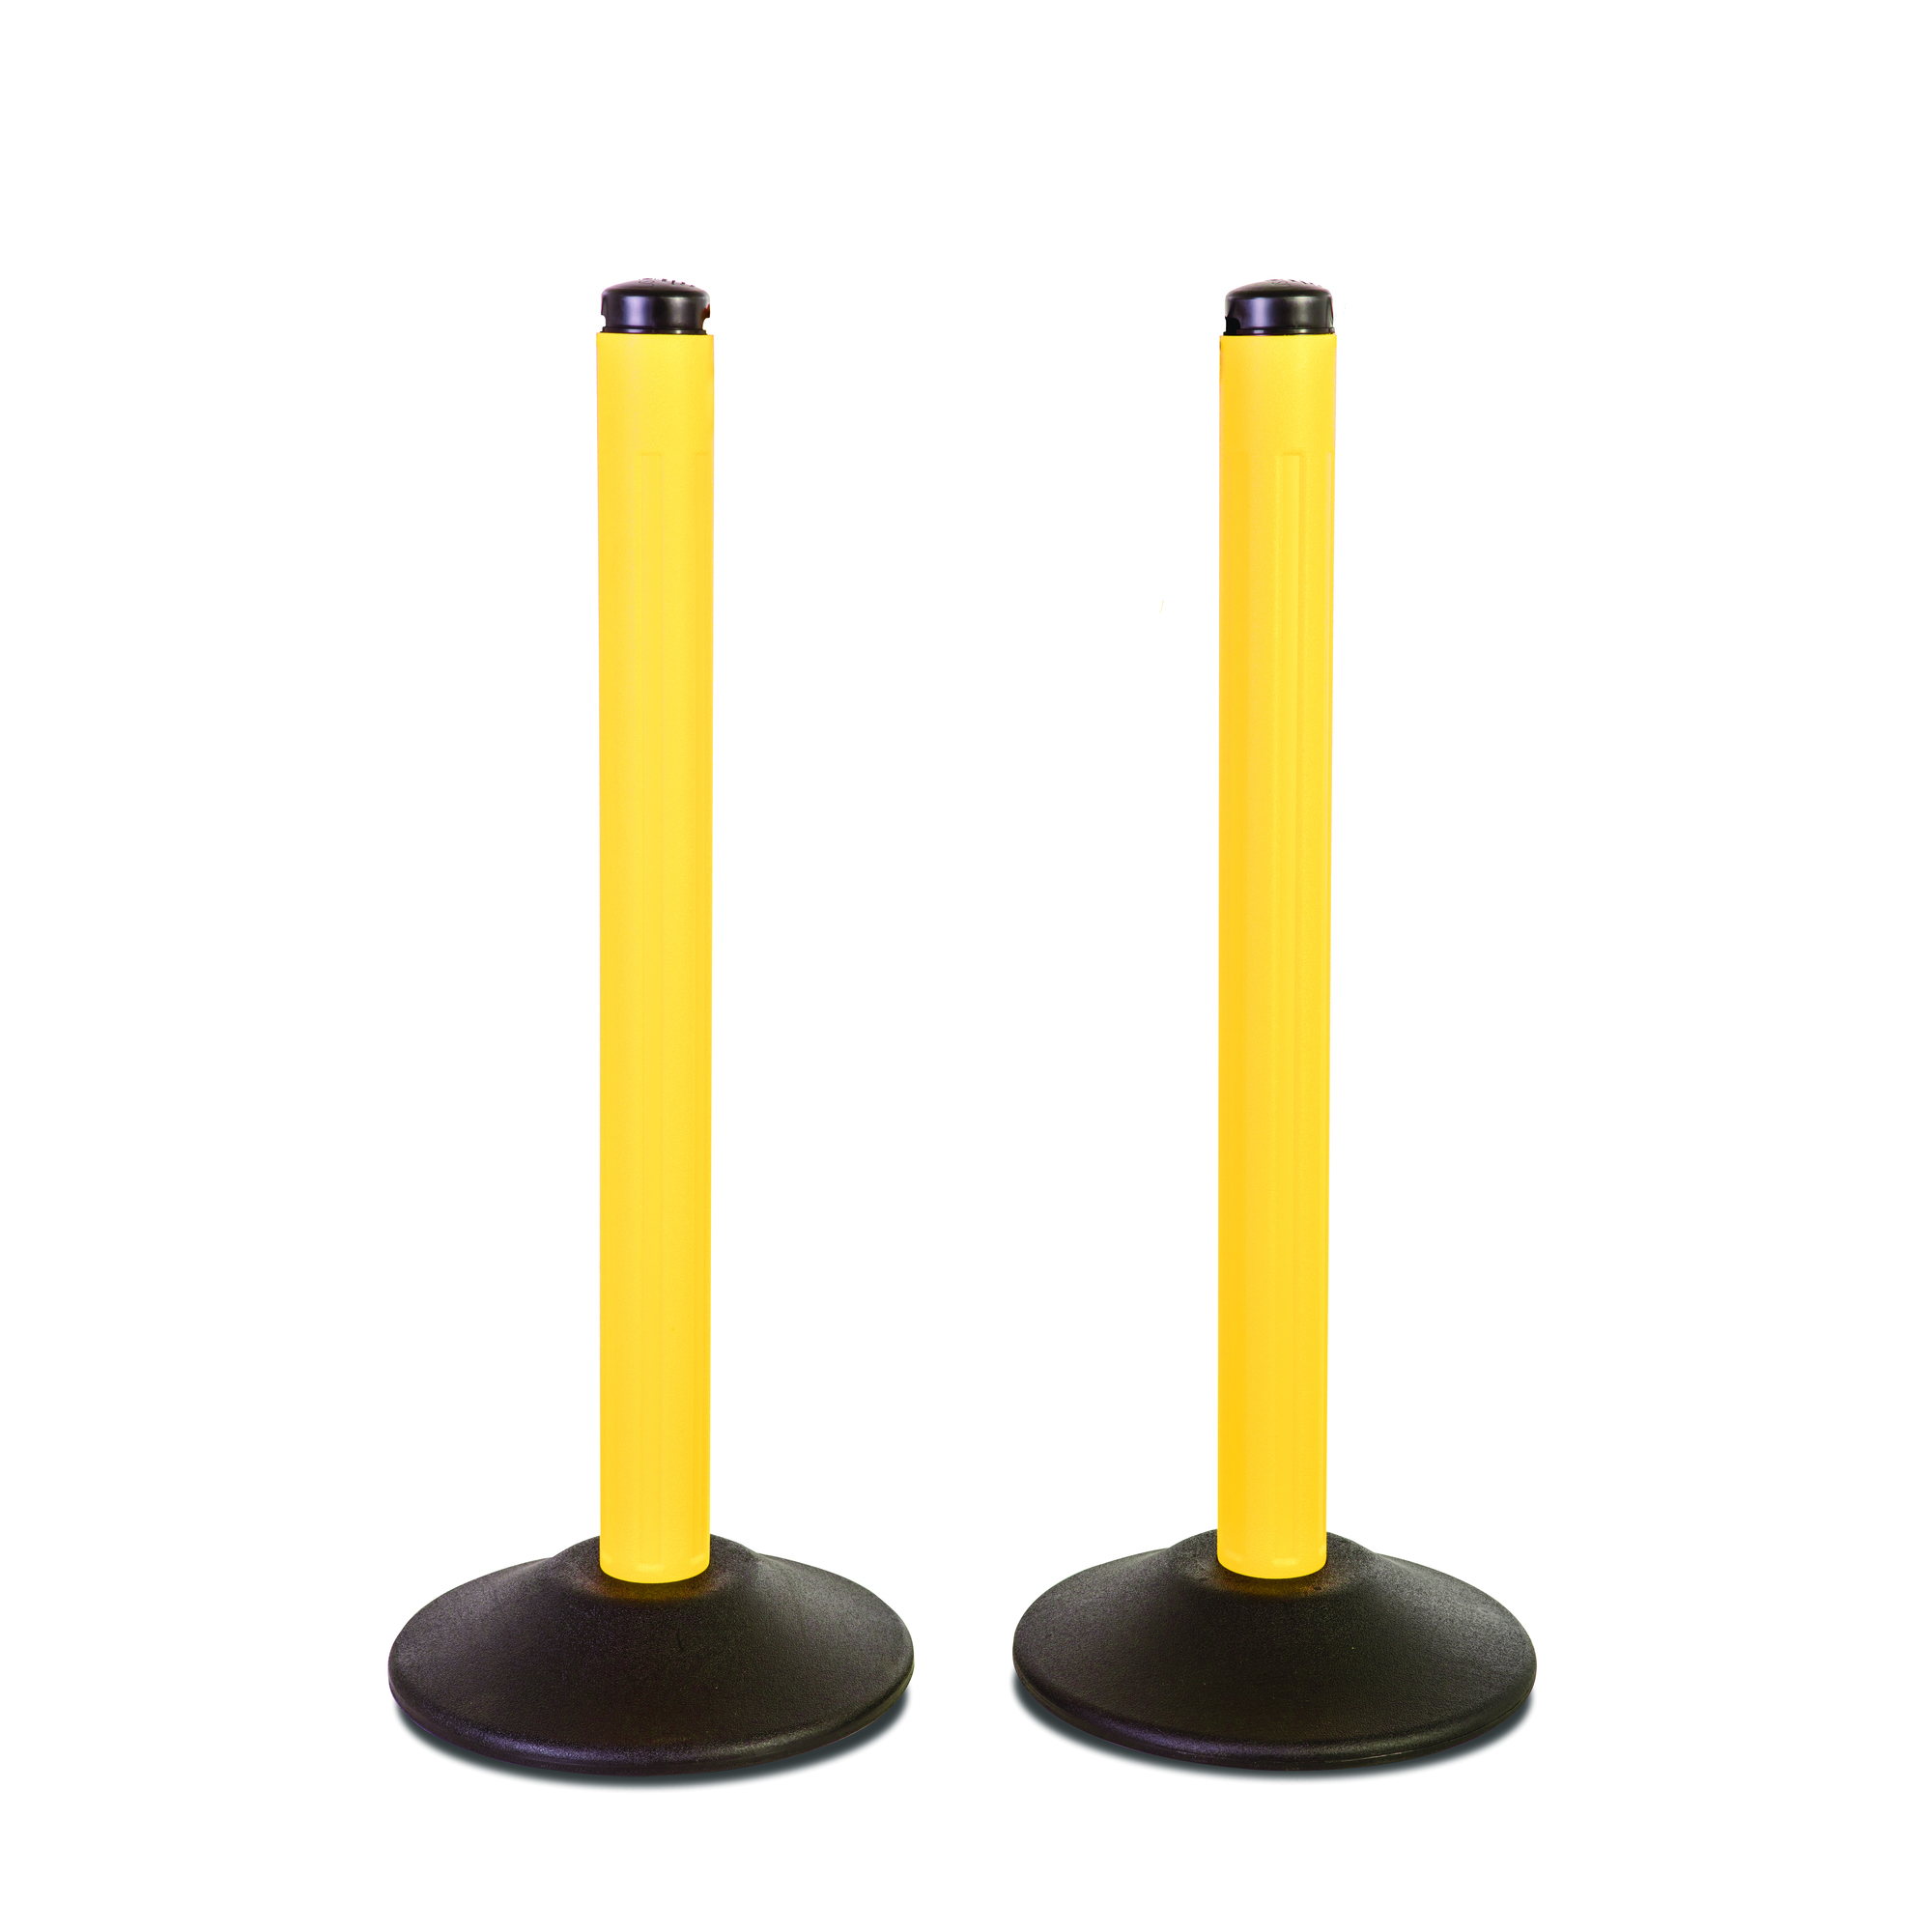 US Weight, Yellow post, no chain - weighted base - 2 pack, Model U2007NC